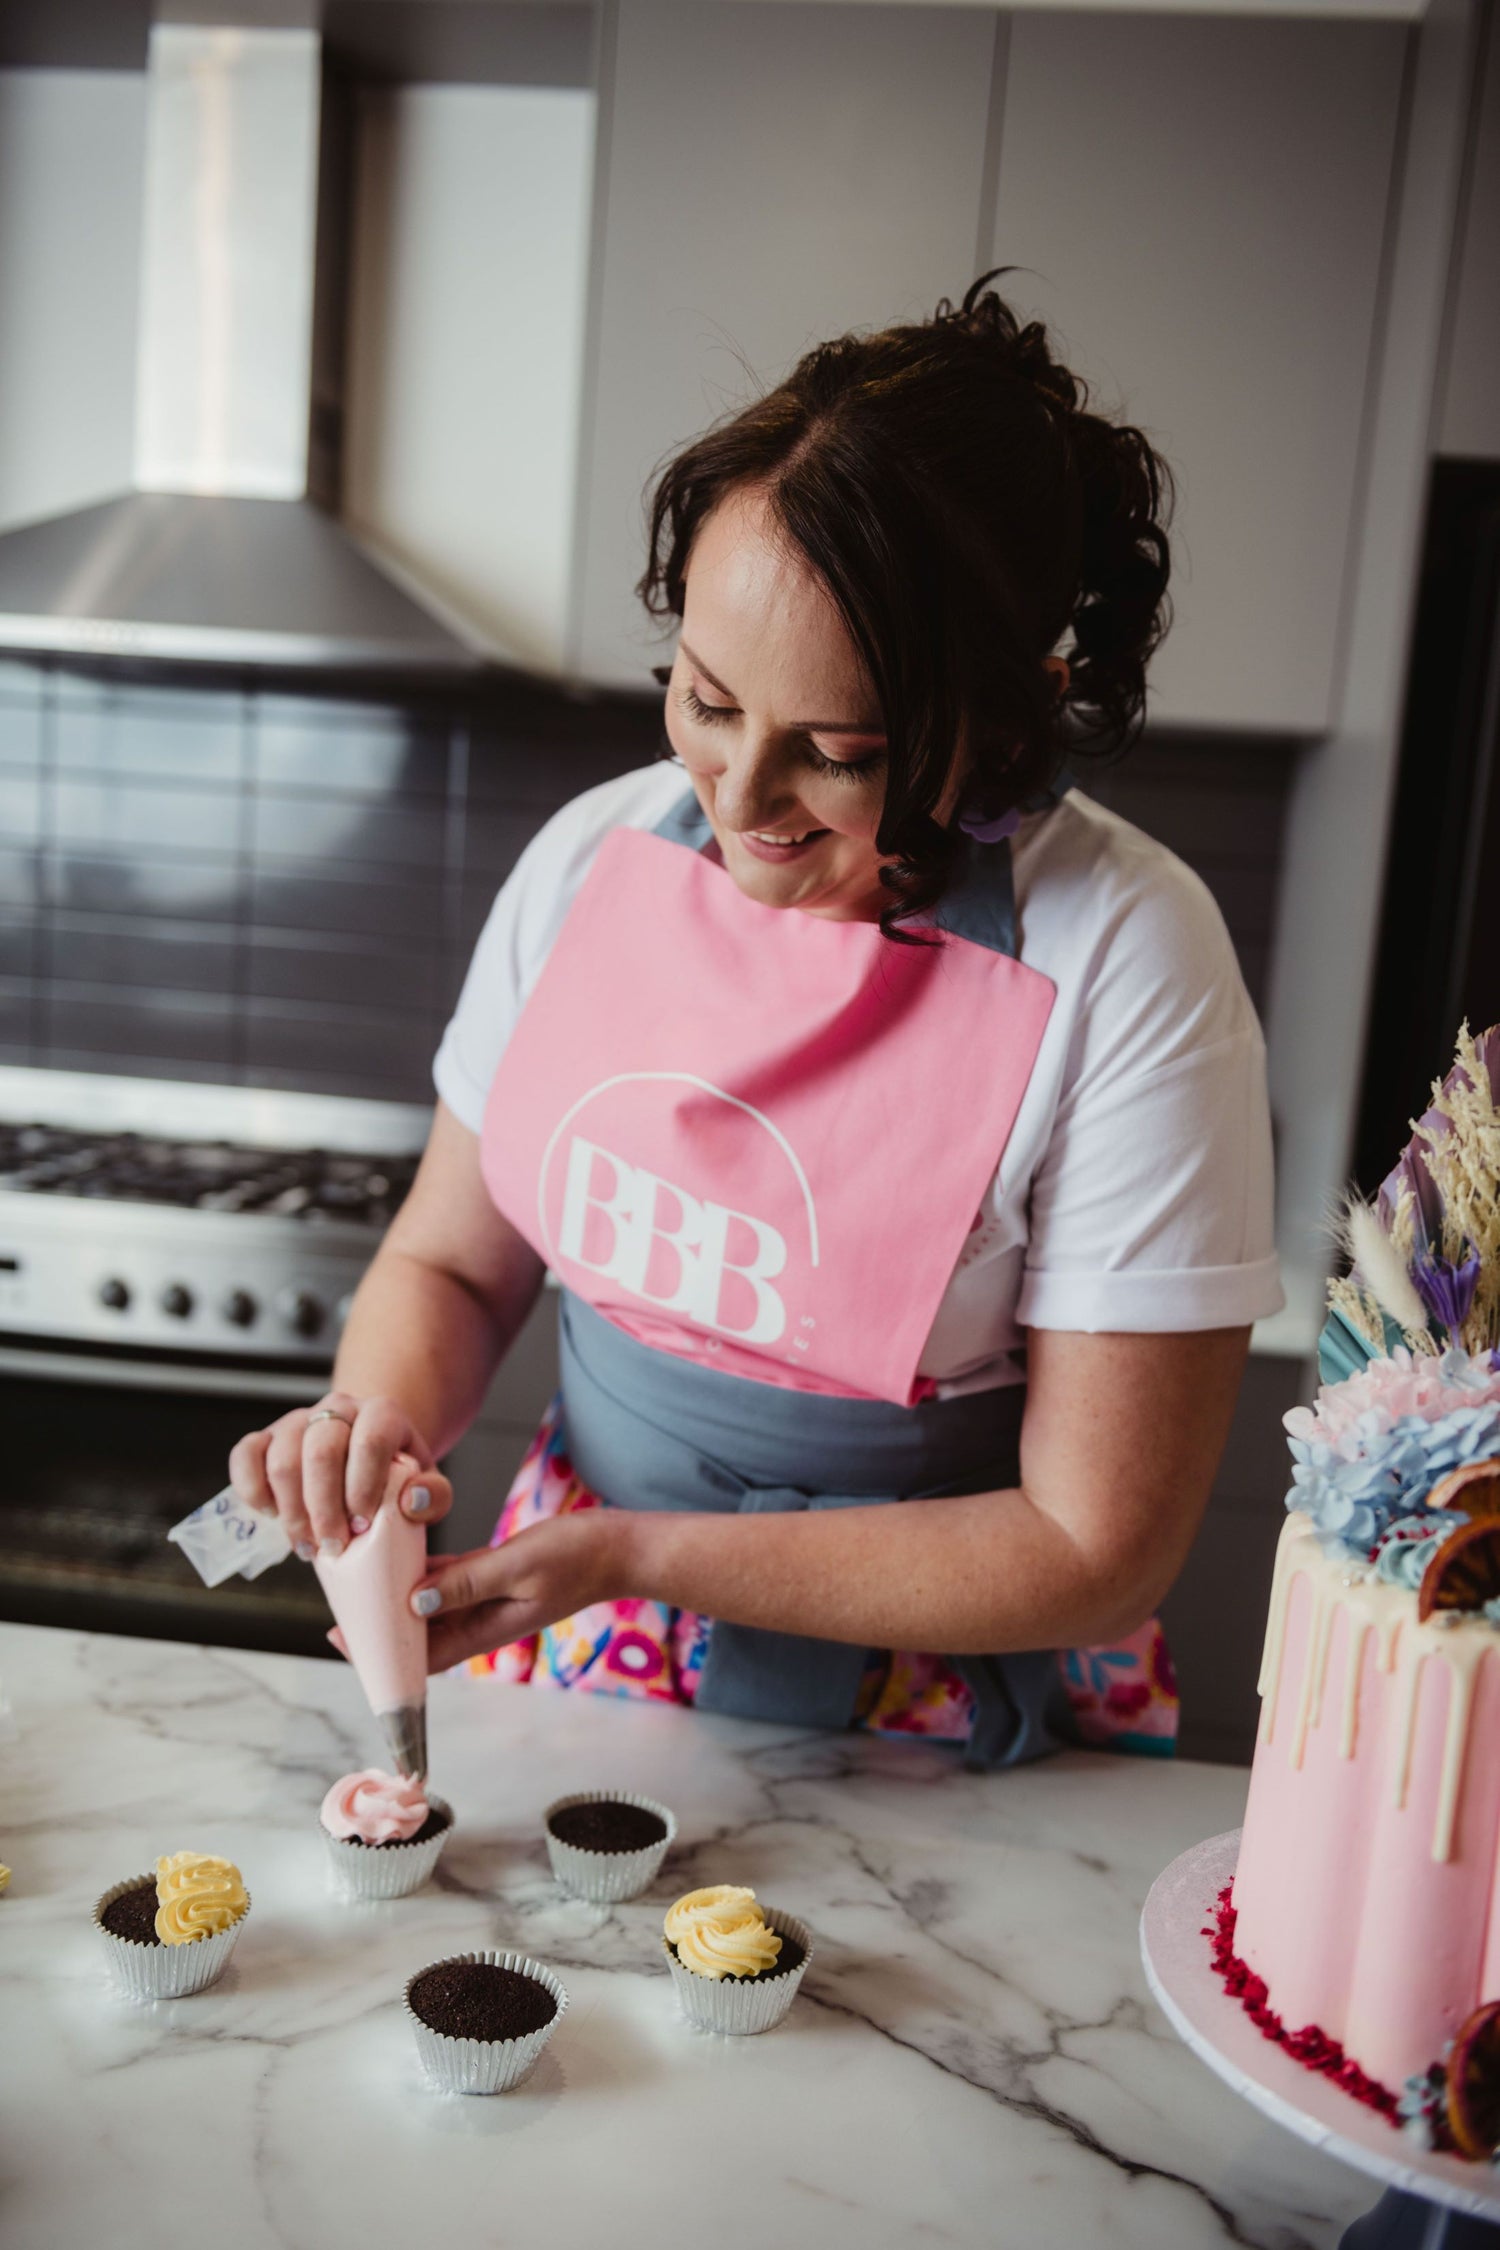 Be Bold Bakes - Edible Sprinkles and Cake Decorating Supplies Online